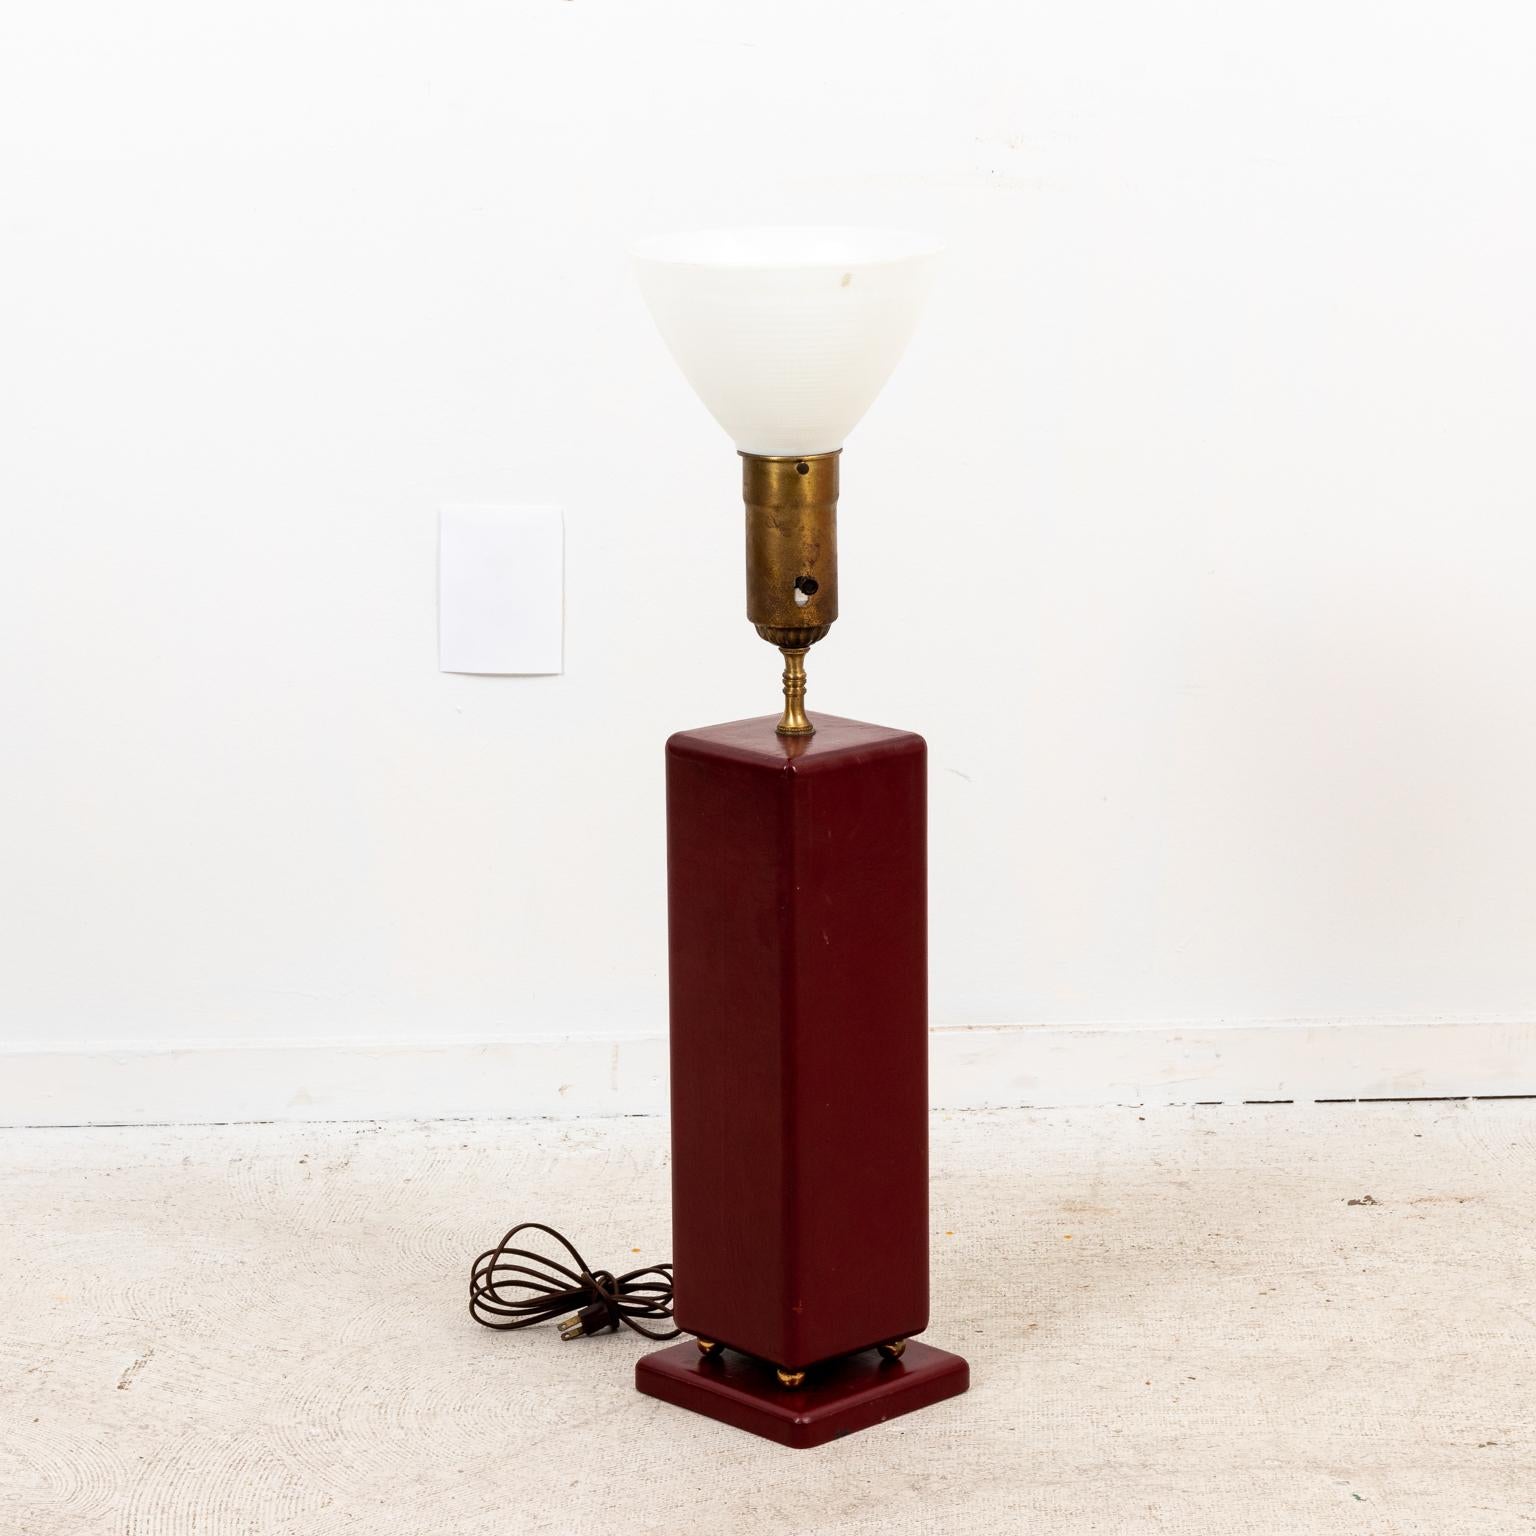 Circa 1950s Tommi Parzinger style red leather table lamps. The square body is supported by four brass balls on a larger square base. Electrified. Please note of wear consistent with age including very small wear to one side of the lamp. Needs to be